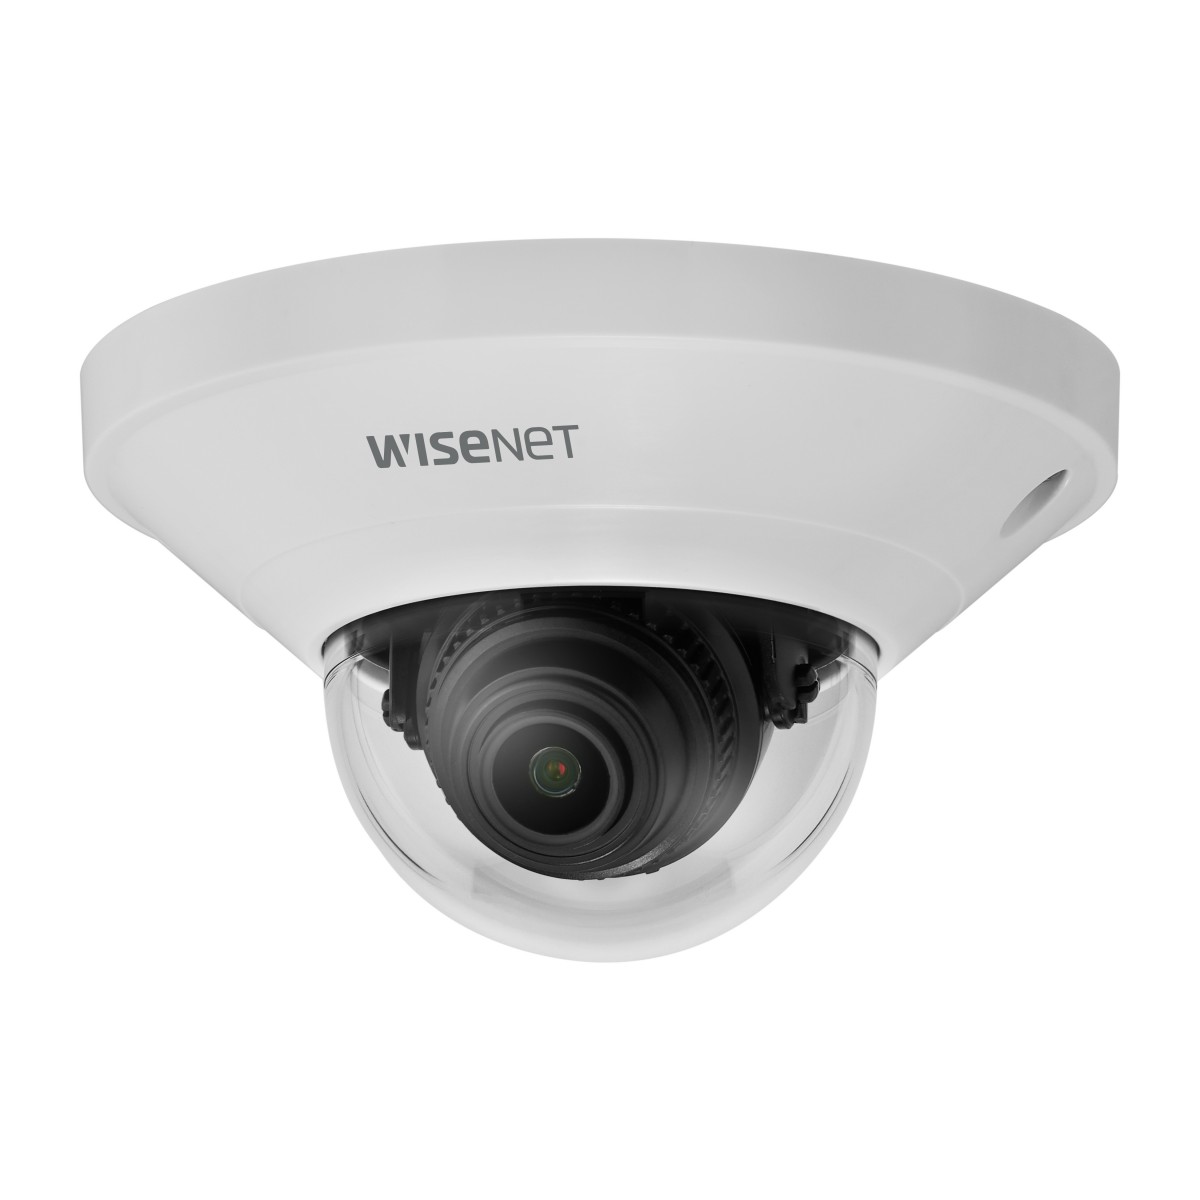 Hanwha Techwin Hanwha QND-8021 - IP security camera - Indoor & outdoor - Wired - Simplified Chinese - Traditional Chinese - Czec